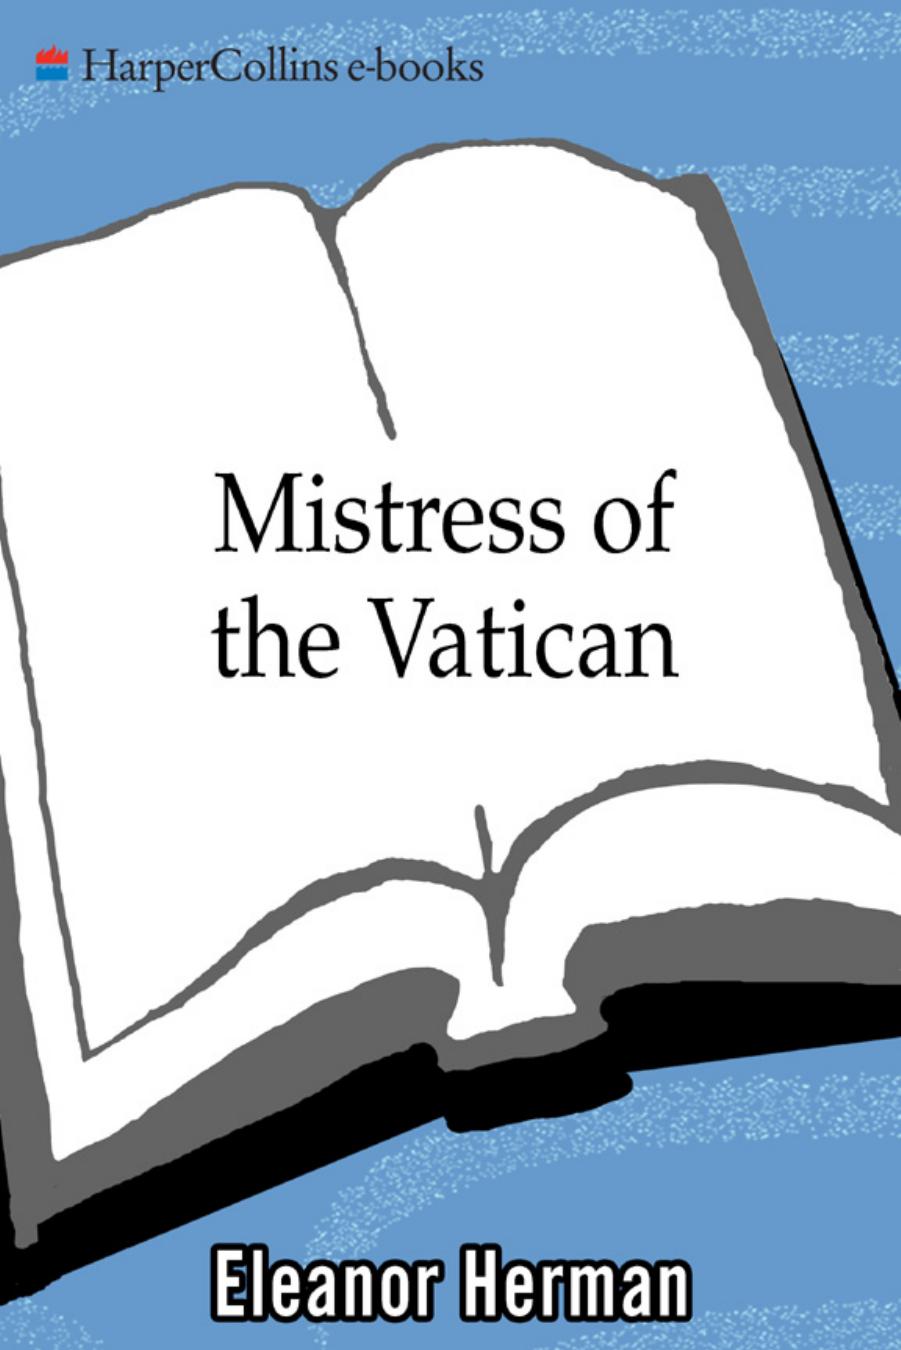 Mistress of the Vatican by Eleanor Herman